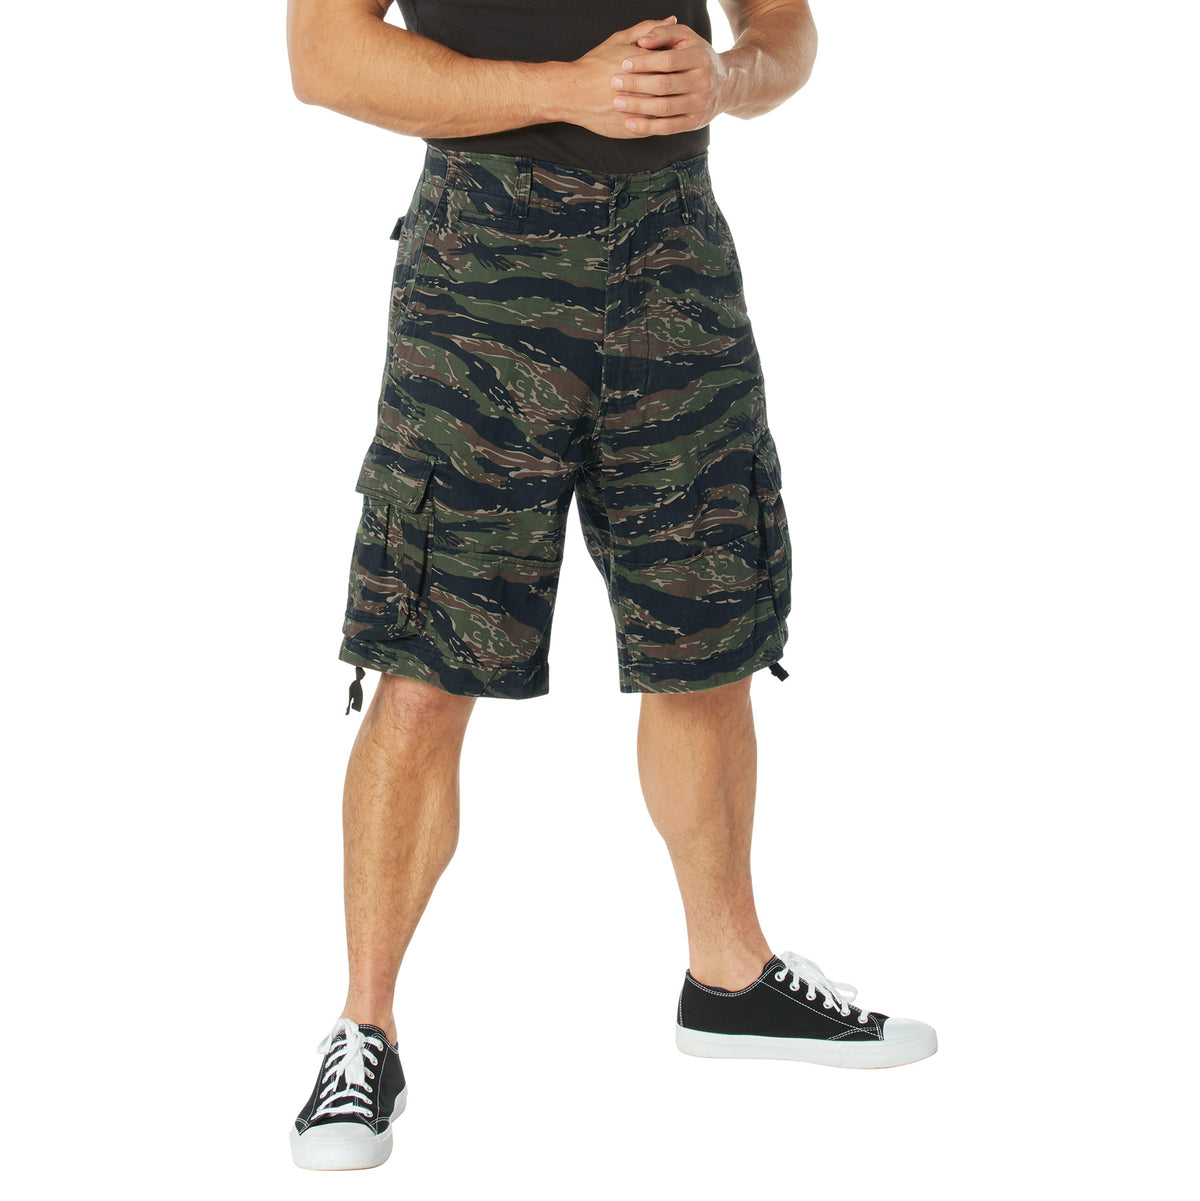 Rothco Vintage Camo Infantry Utility Shorts - Various Colors